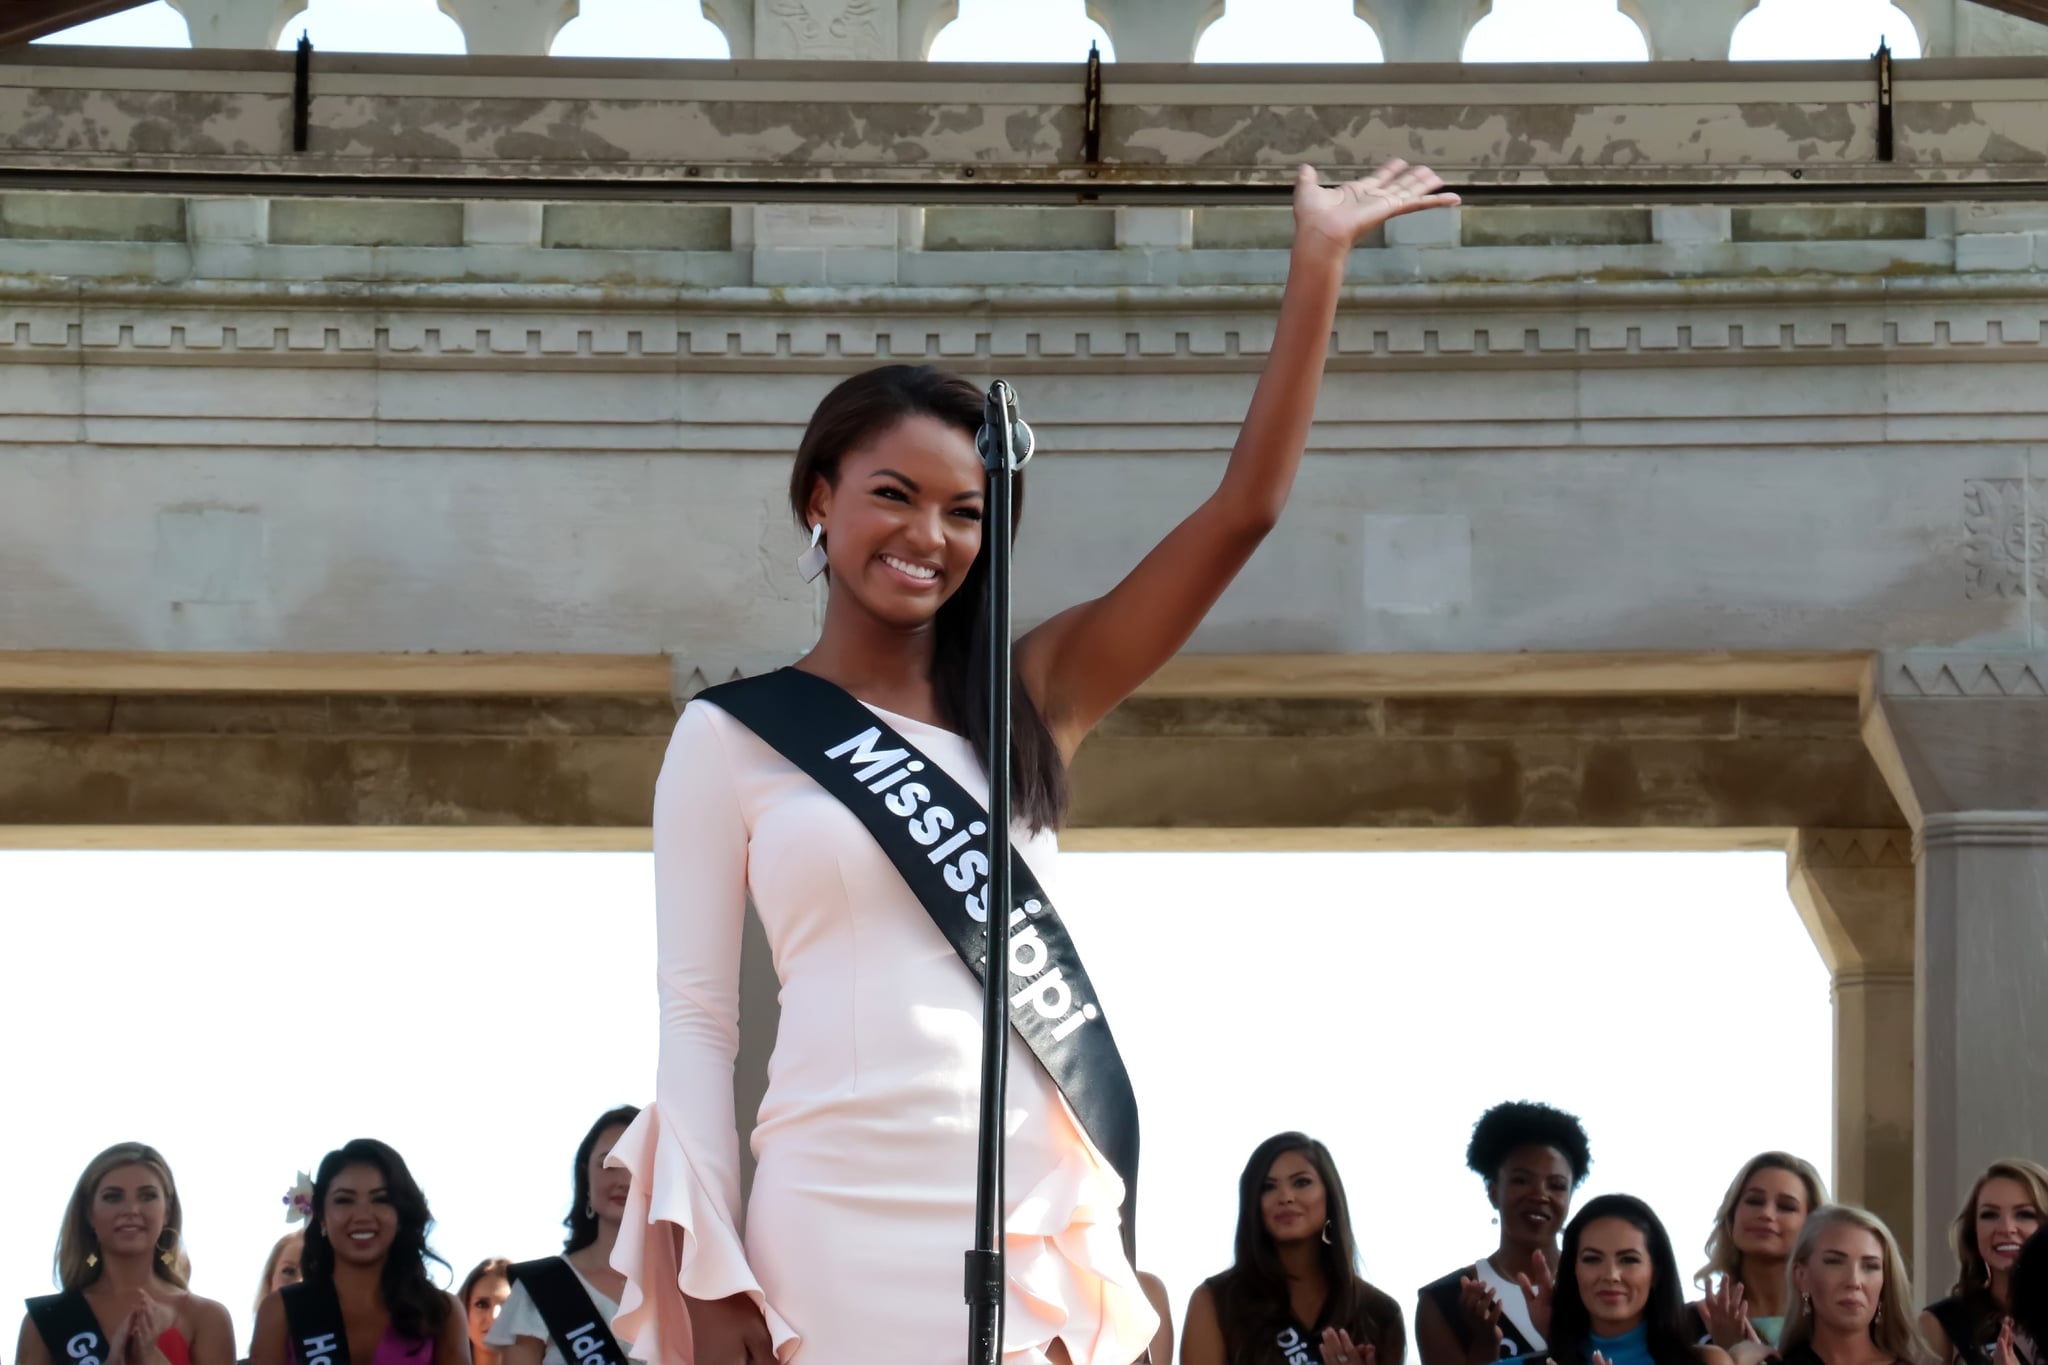 ATLANTIC CITY, NJ - AUGUST 30: Miss Mississippi 2018, Asya Branch  waves to crowd at Kennedy Plaza on August 30, 2018 in Atlantic City, New Jersey.  (Photo by Donald Kravitz/Getty Images)